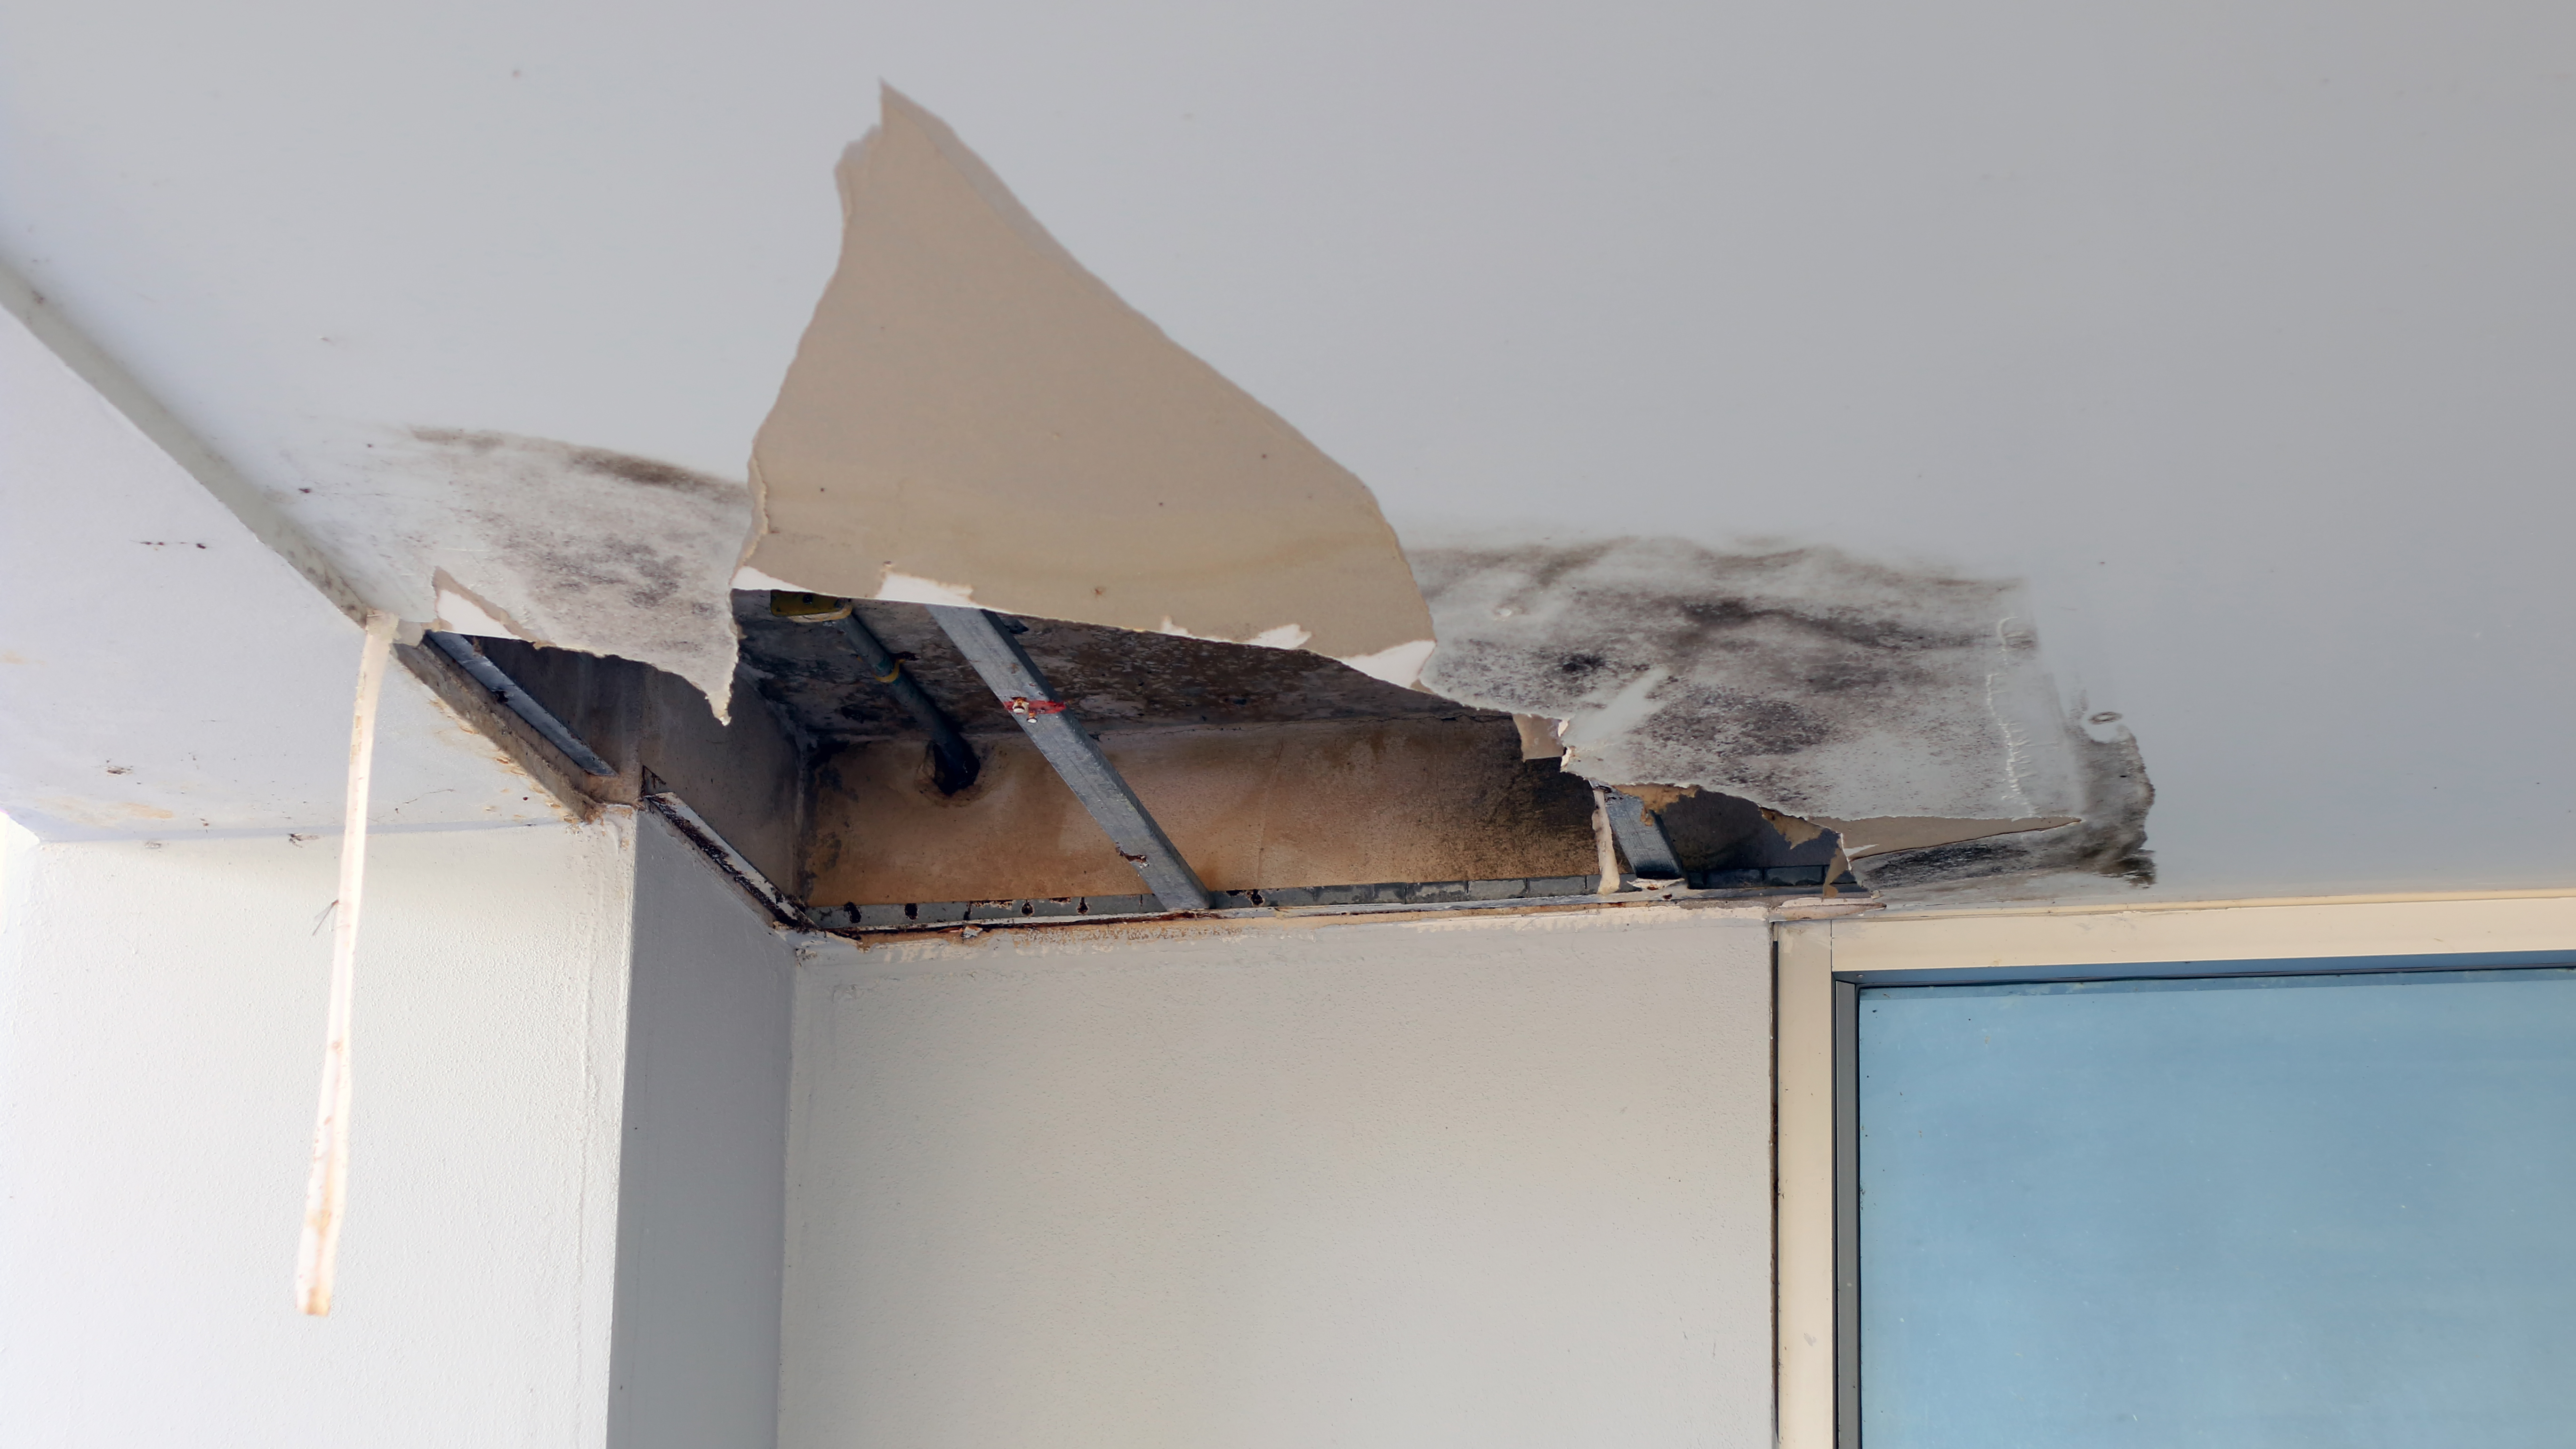 Ceiling panels damaged hole in the roof office from drain pipes water leakage. Office building or house problem from plumber system.; Shutterstock ID 760440673; purchase_order: NA; job: RICS Property Journal Jan22; client: RICS; other: 